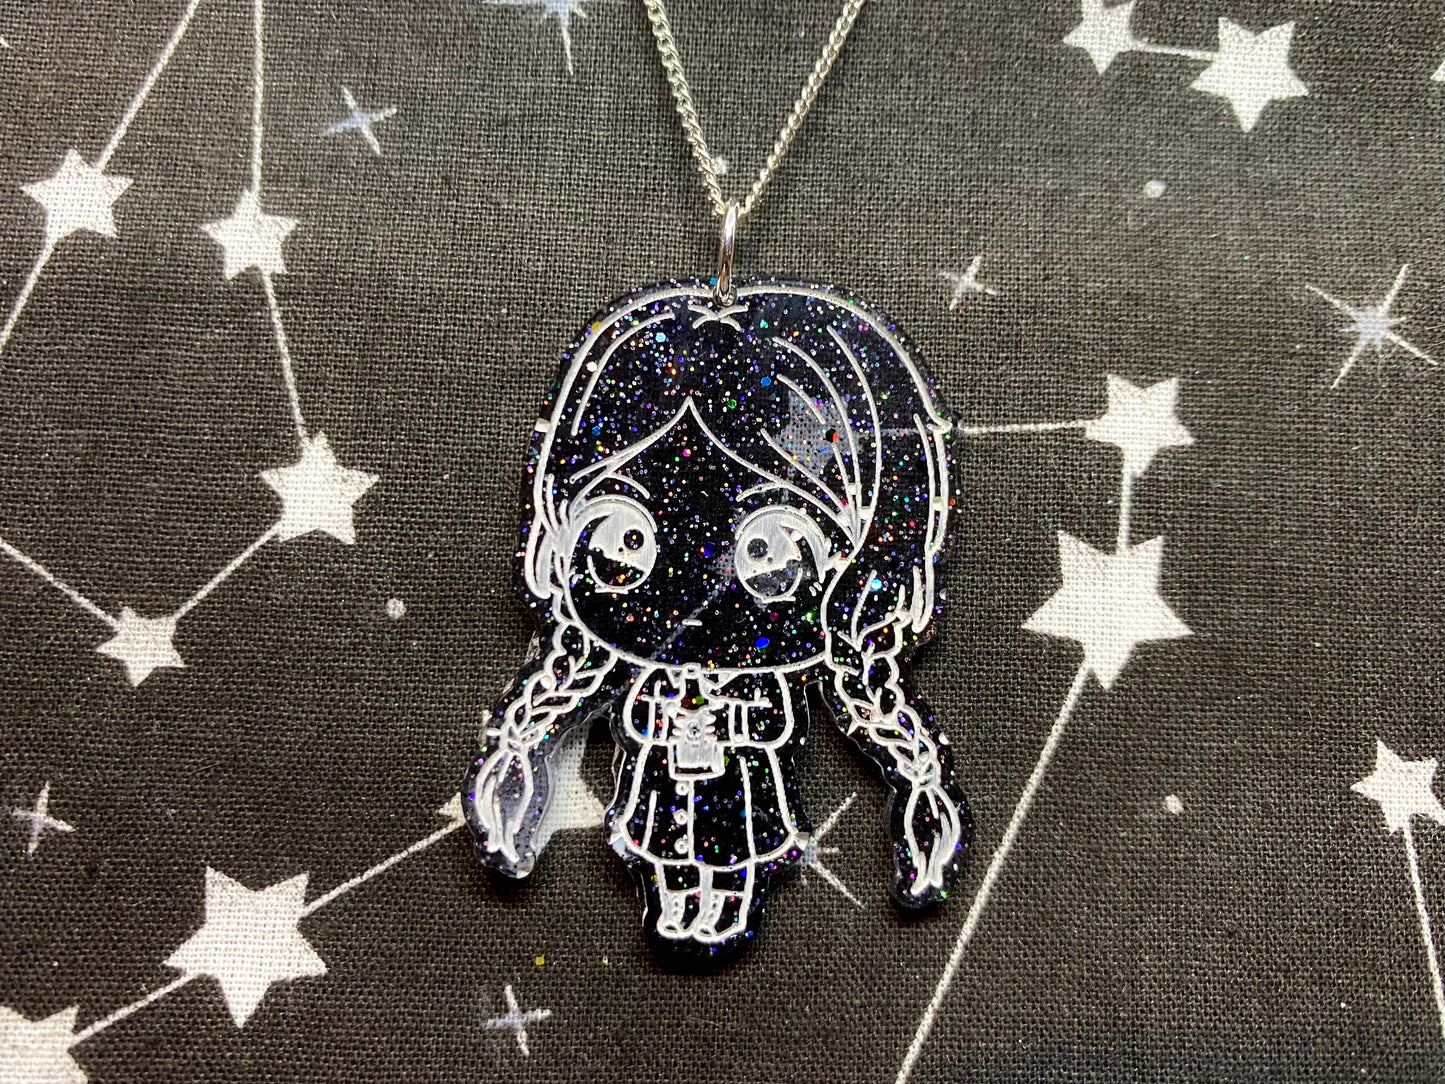 Spooky Family Necklaces